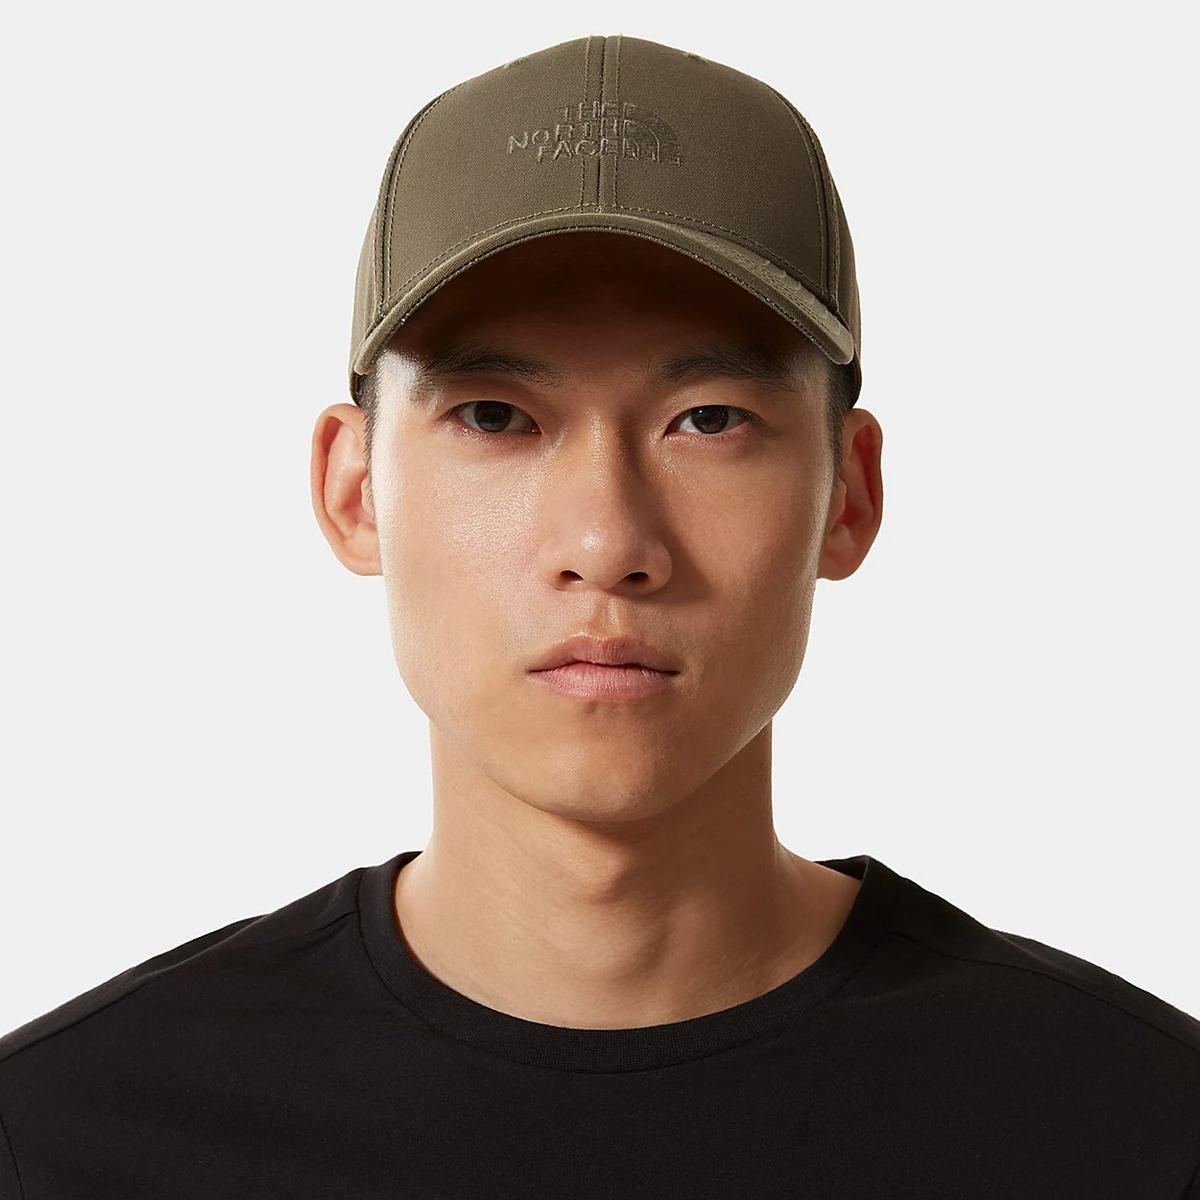 The North Face Unisex '66 Classic Hat - Military Olive